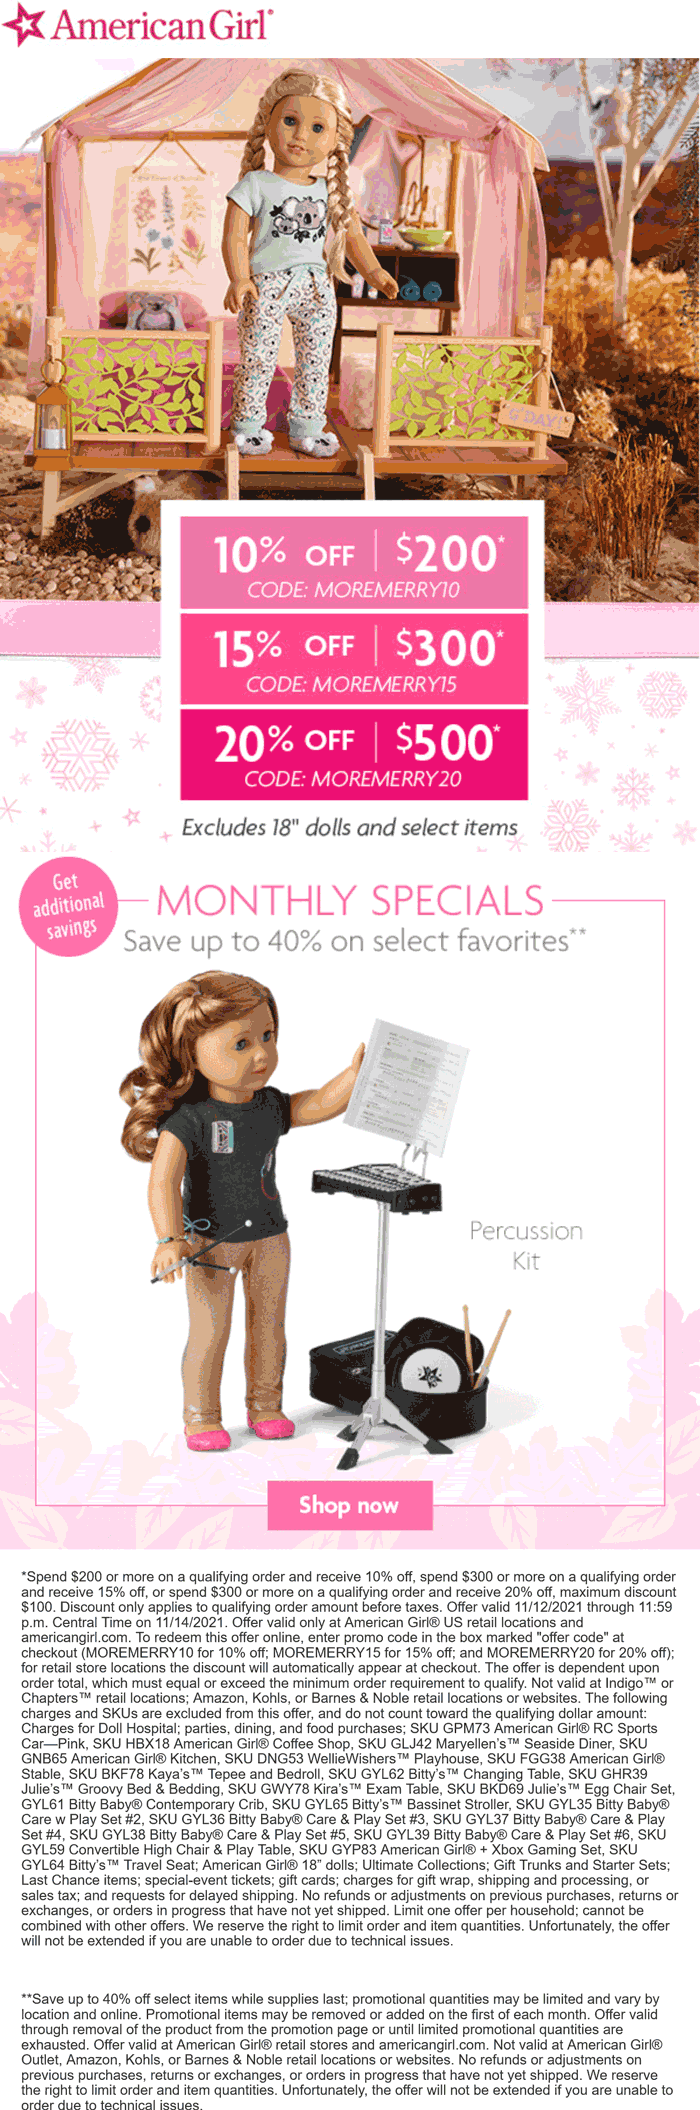 American Girl stores Coupon  10-20% off $200+ at American Girl dolls, or online via promo code MOREMERRY10 #americangirl 